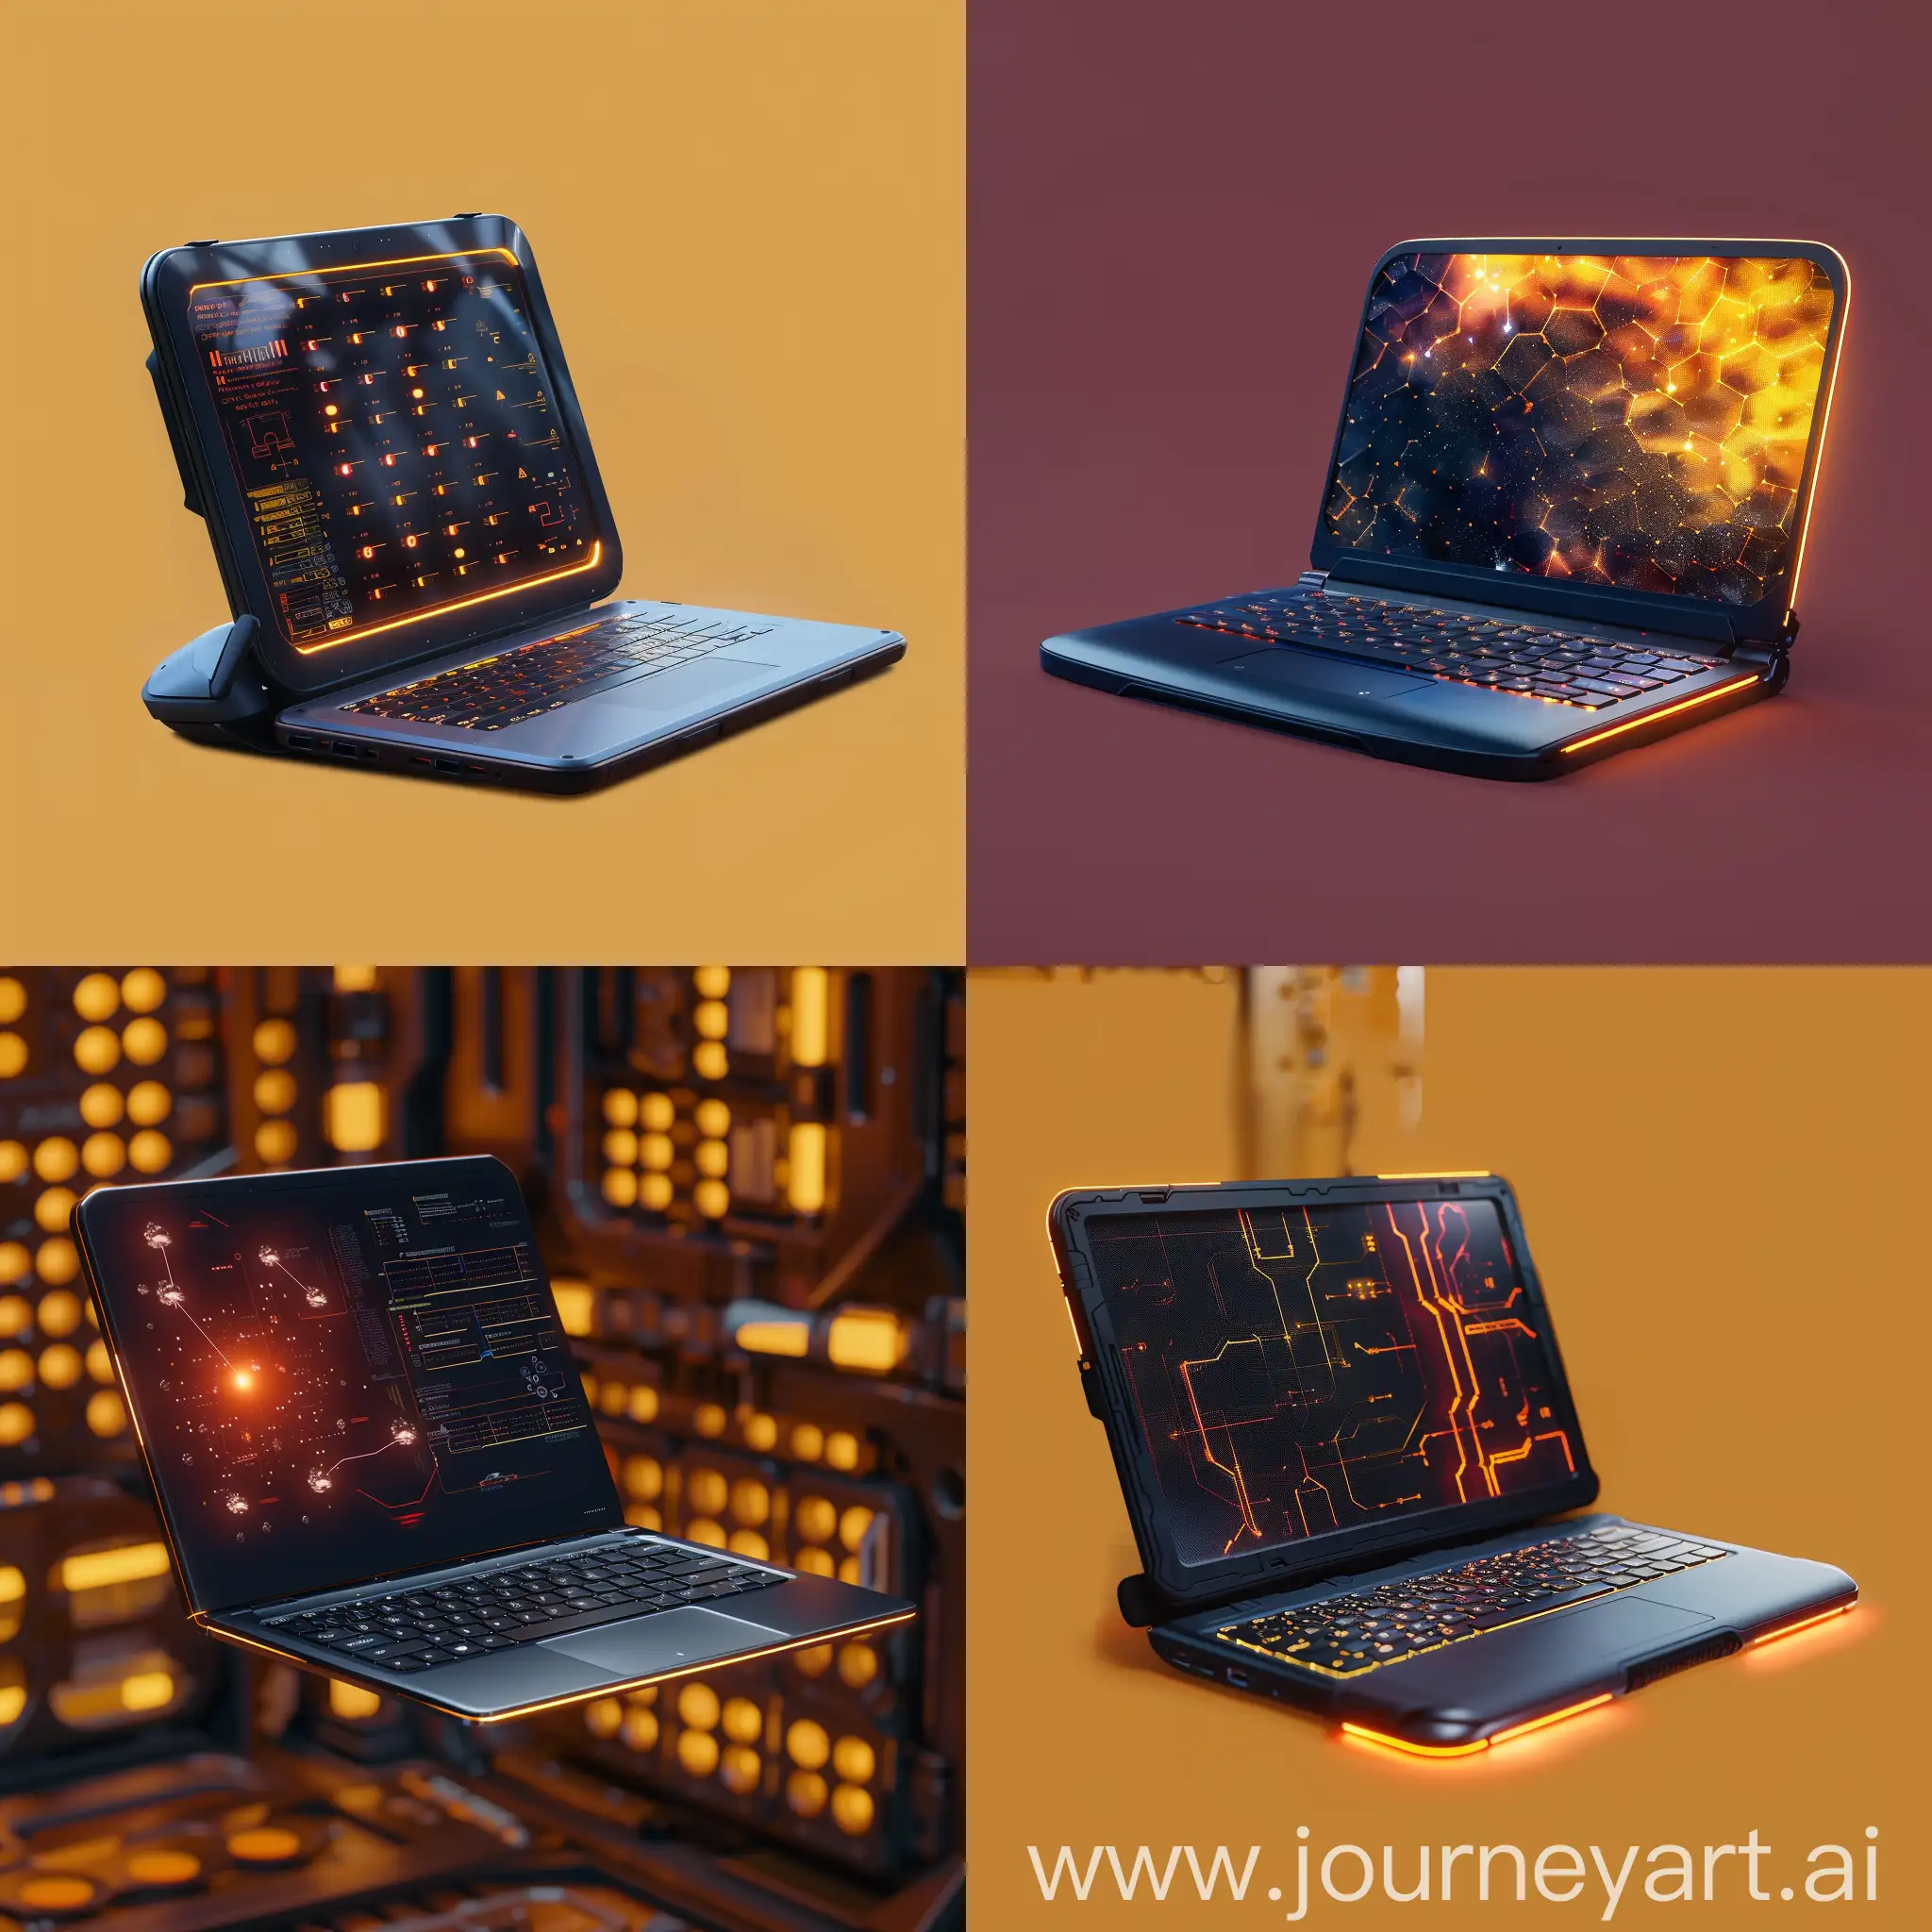 Futuristic-Laptop-with-Flexible-Display-and-Biometric-Security